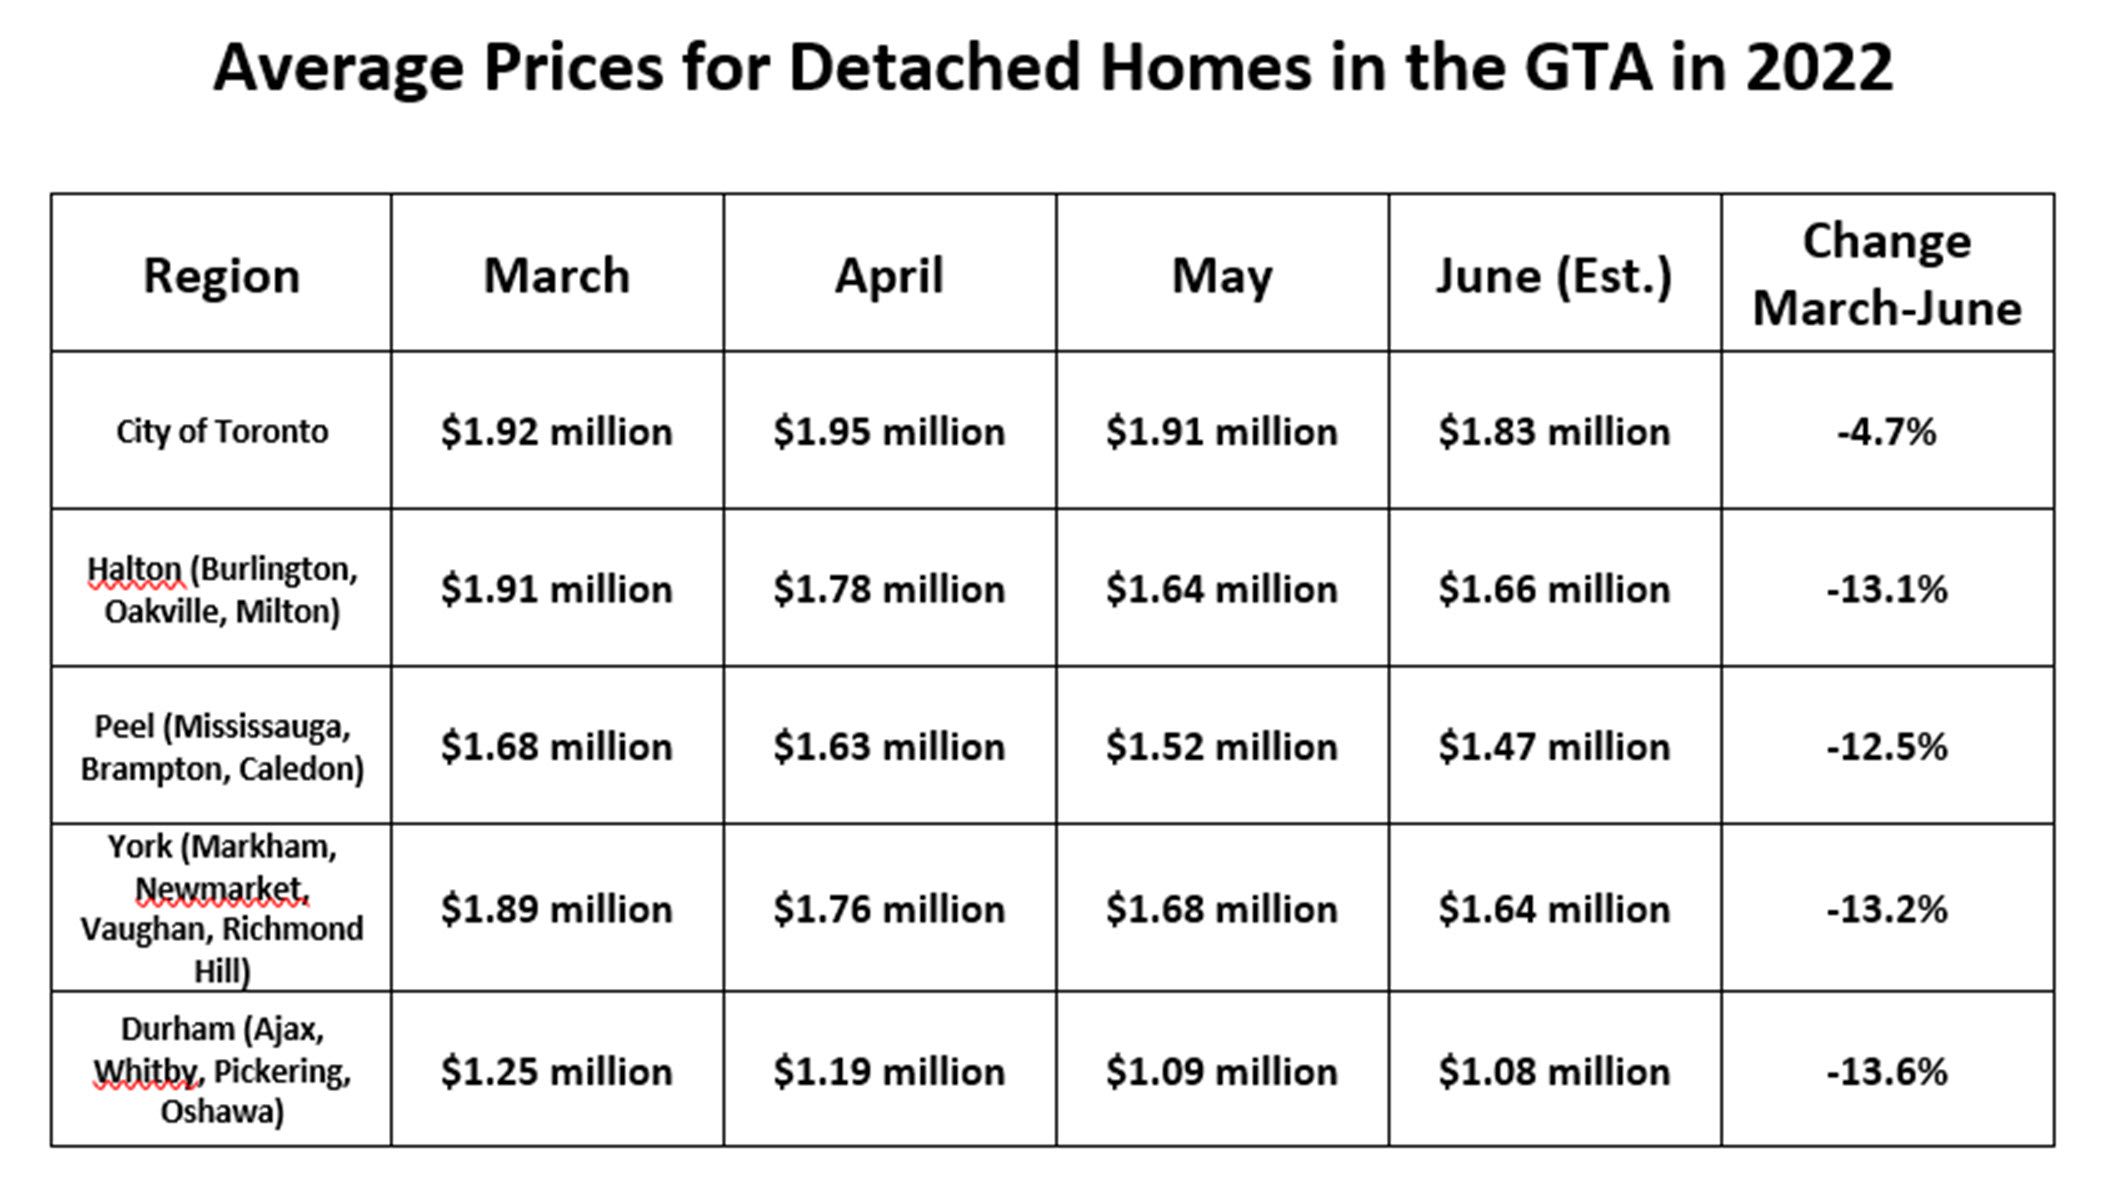 GTA Detached Prices March to June 2022